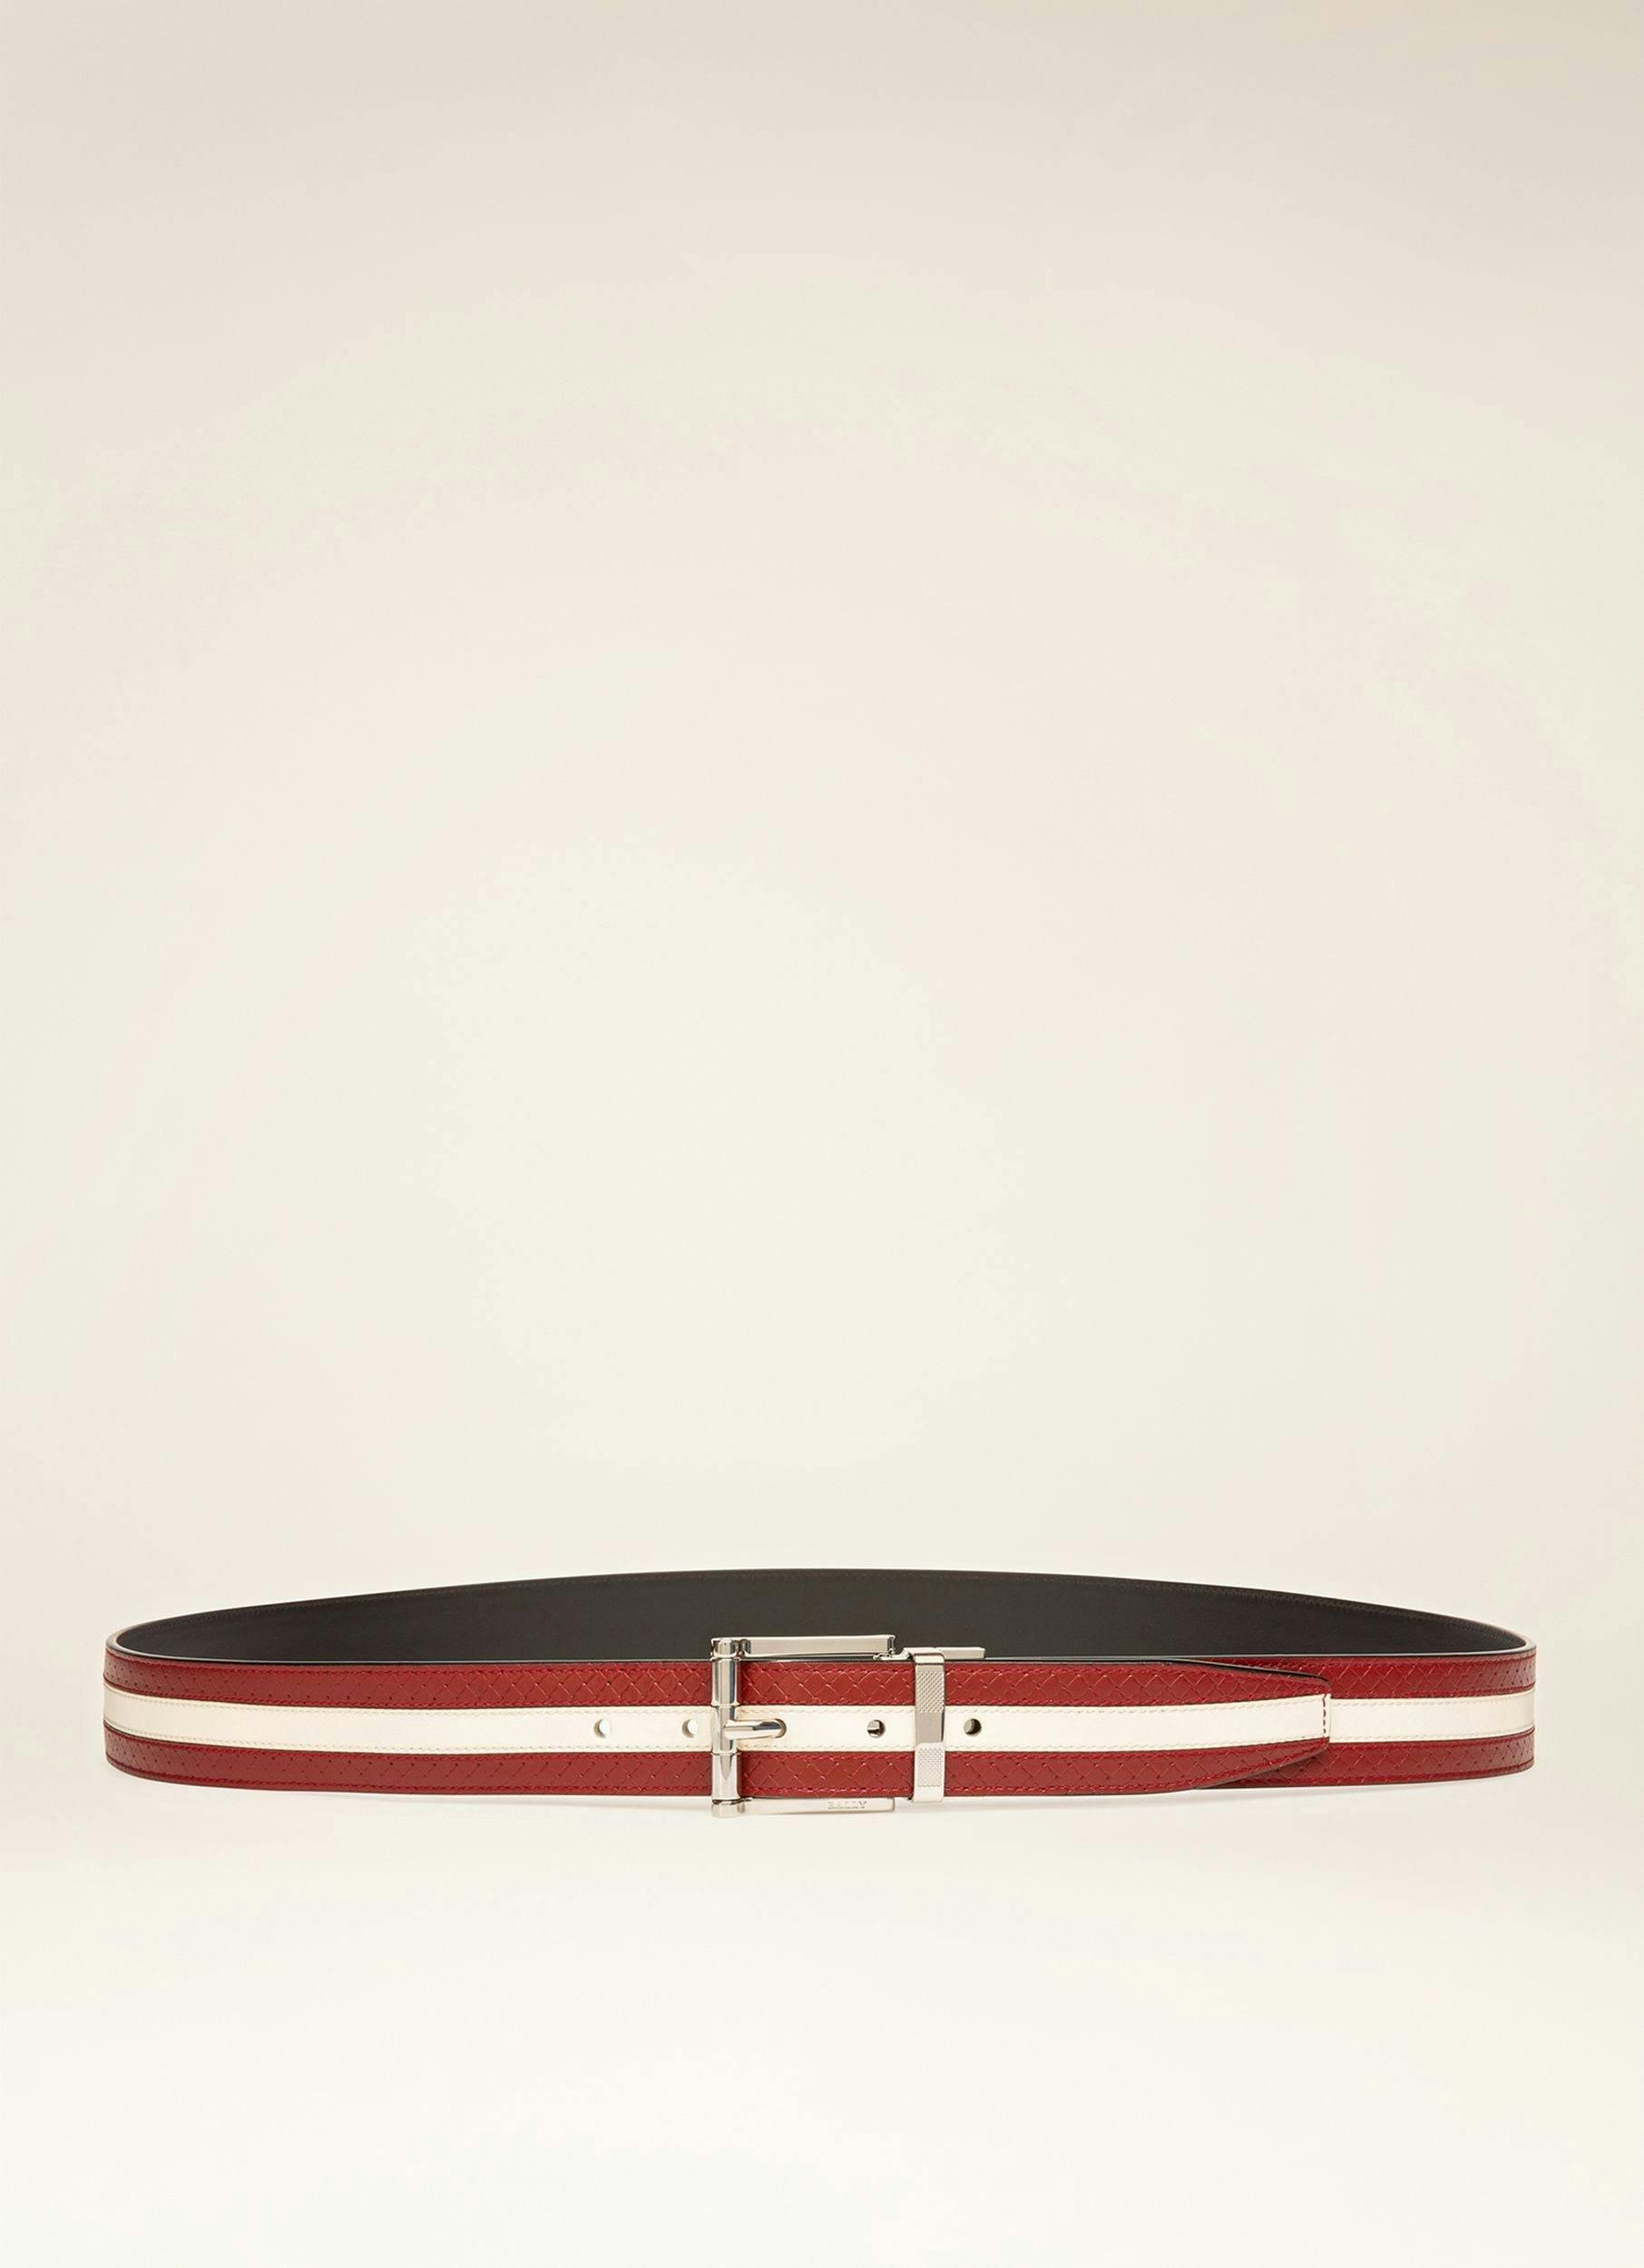 CASUAL Leather 35Mm Belt In Bally Red & Black - Men's - Bally - 01